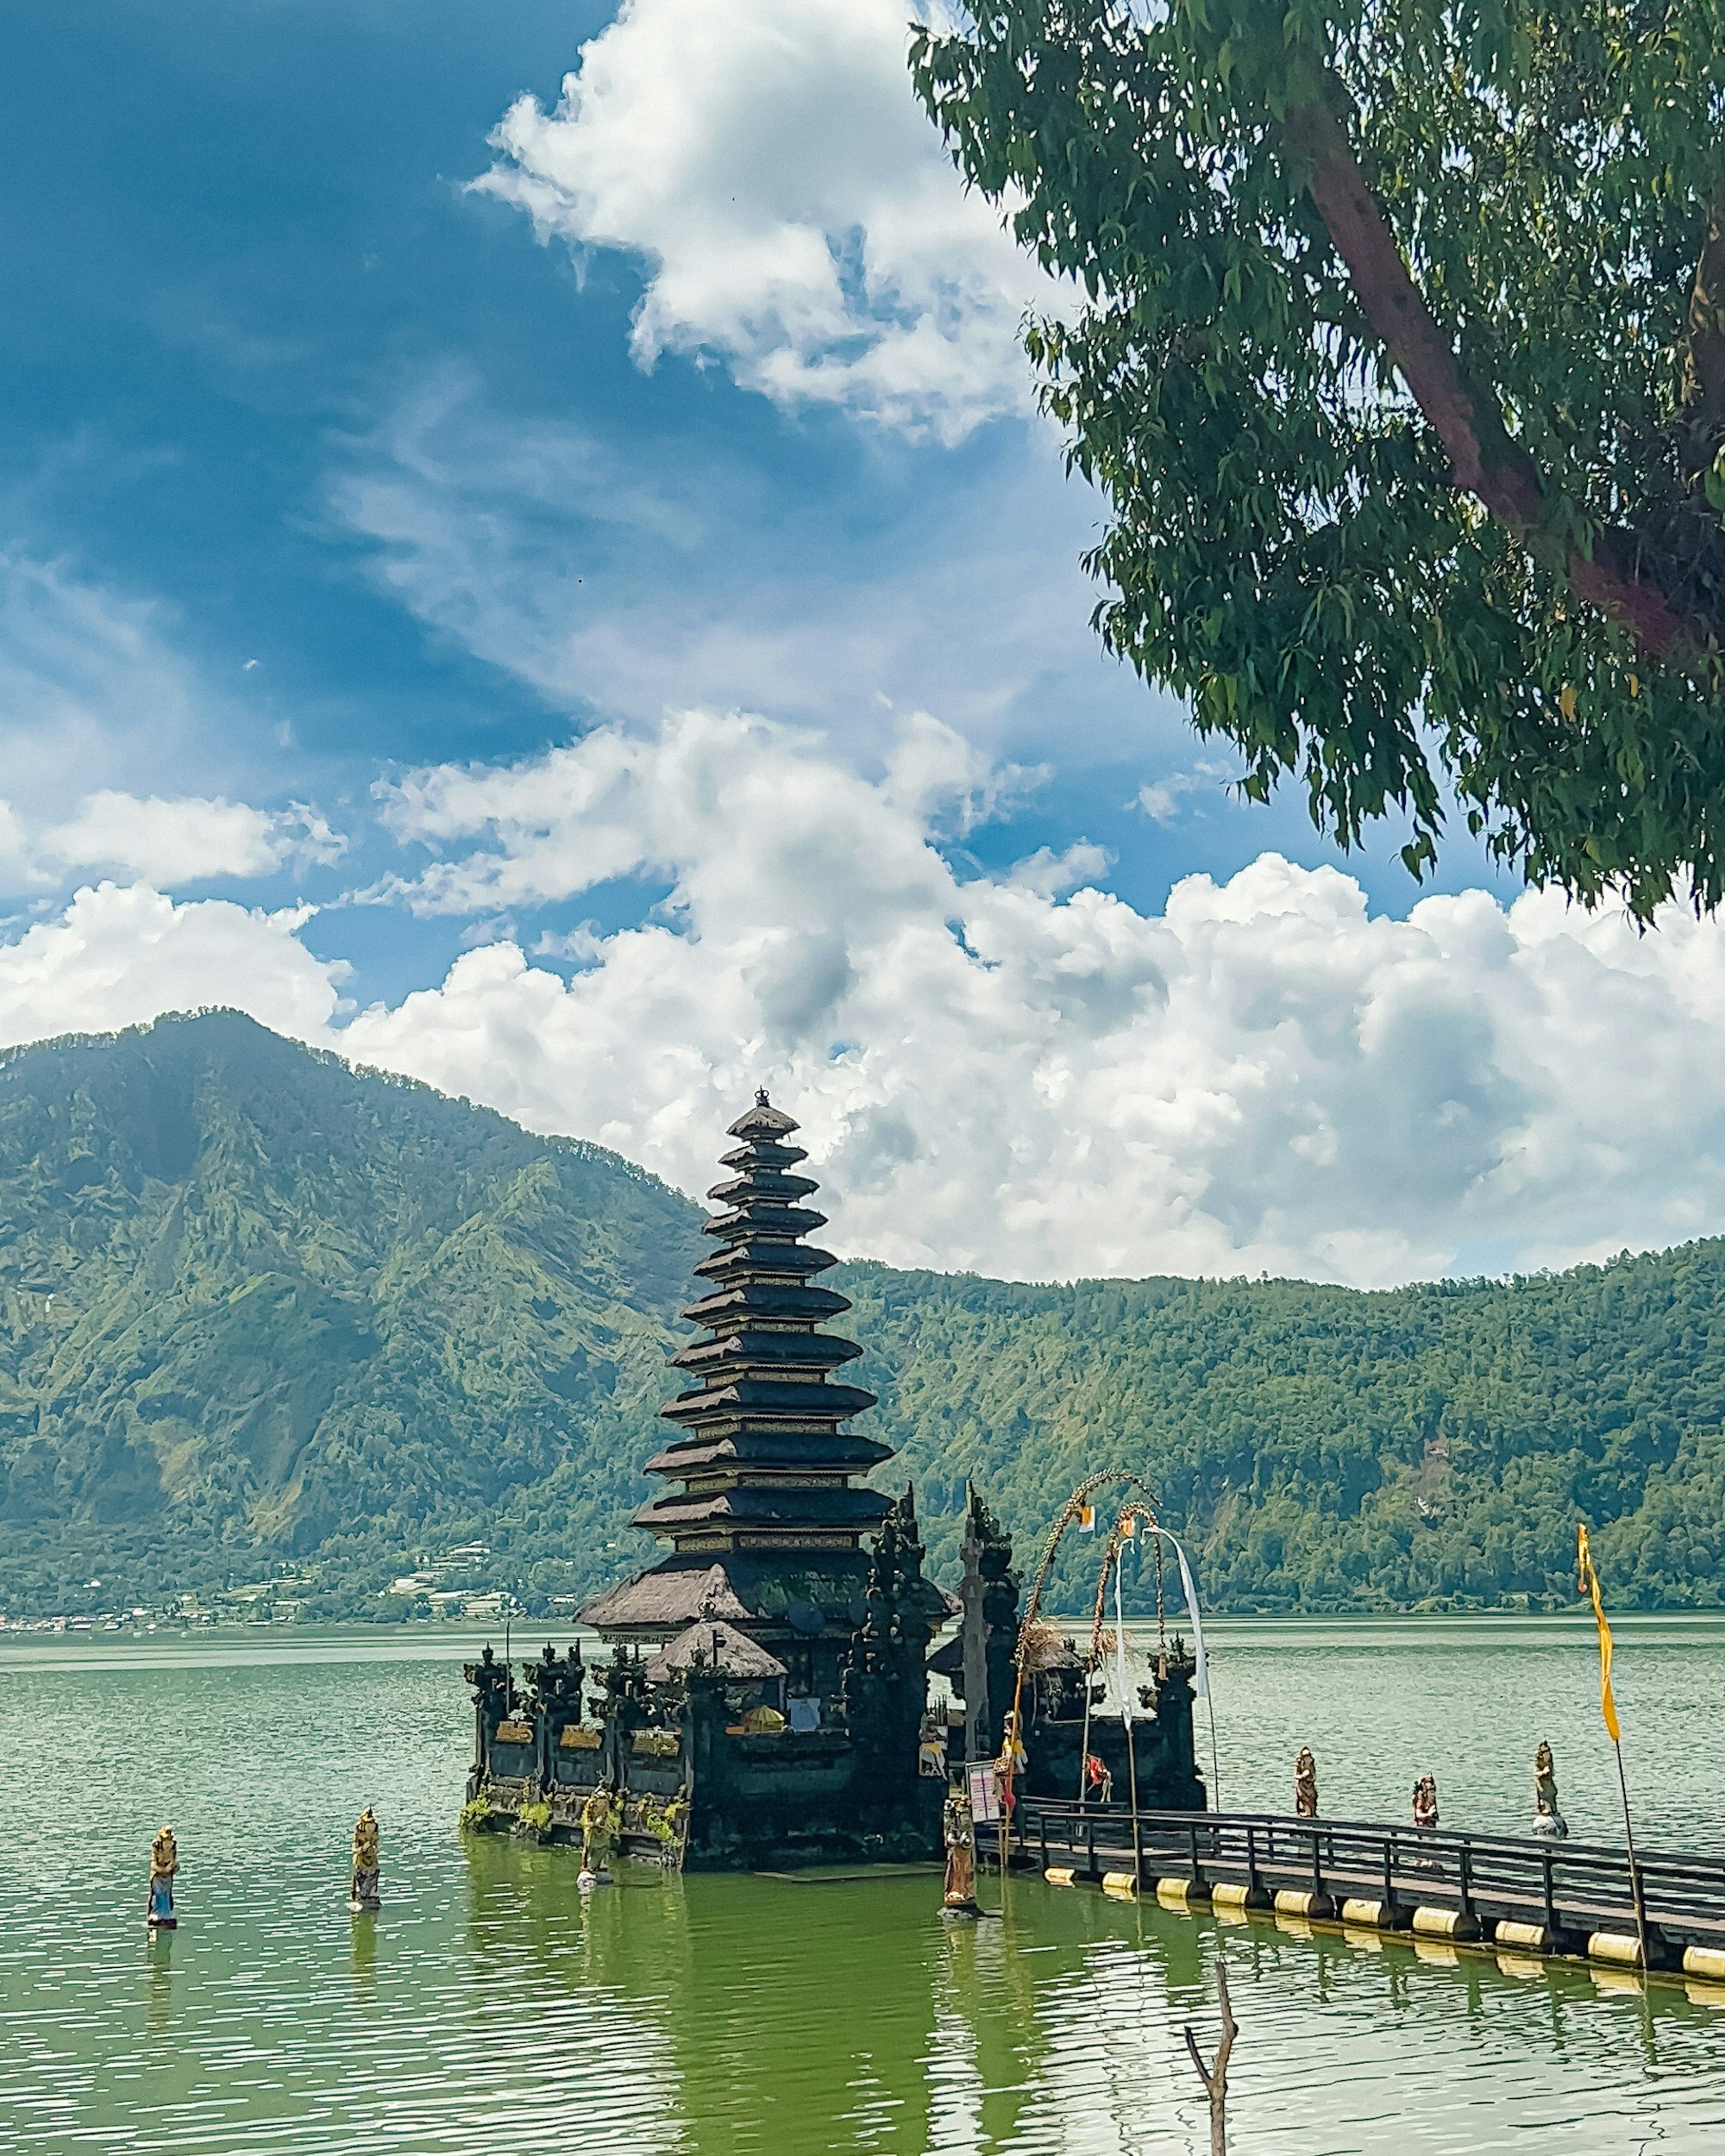 The main temple of the Saraswati Goddess is located on the beautiful Island of Bali which her secret followers visit every year.  